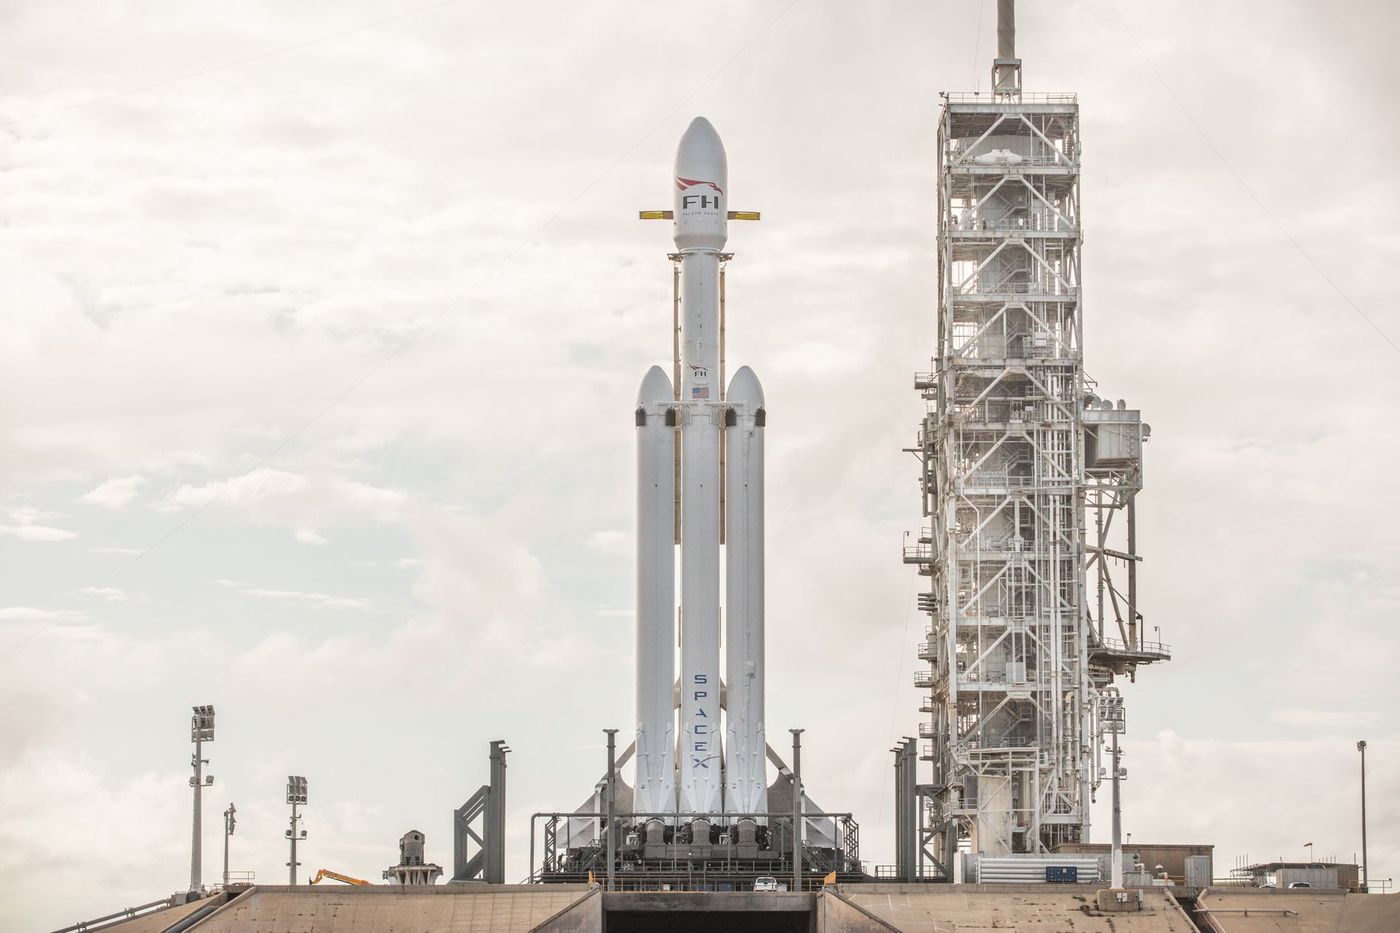 A day shot of the SpaceX Falcon Heavy rocket as it stands tall at launchpad 39A.